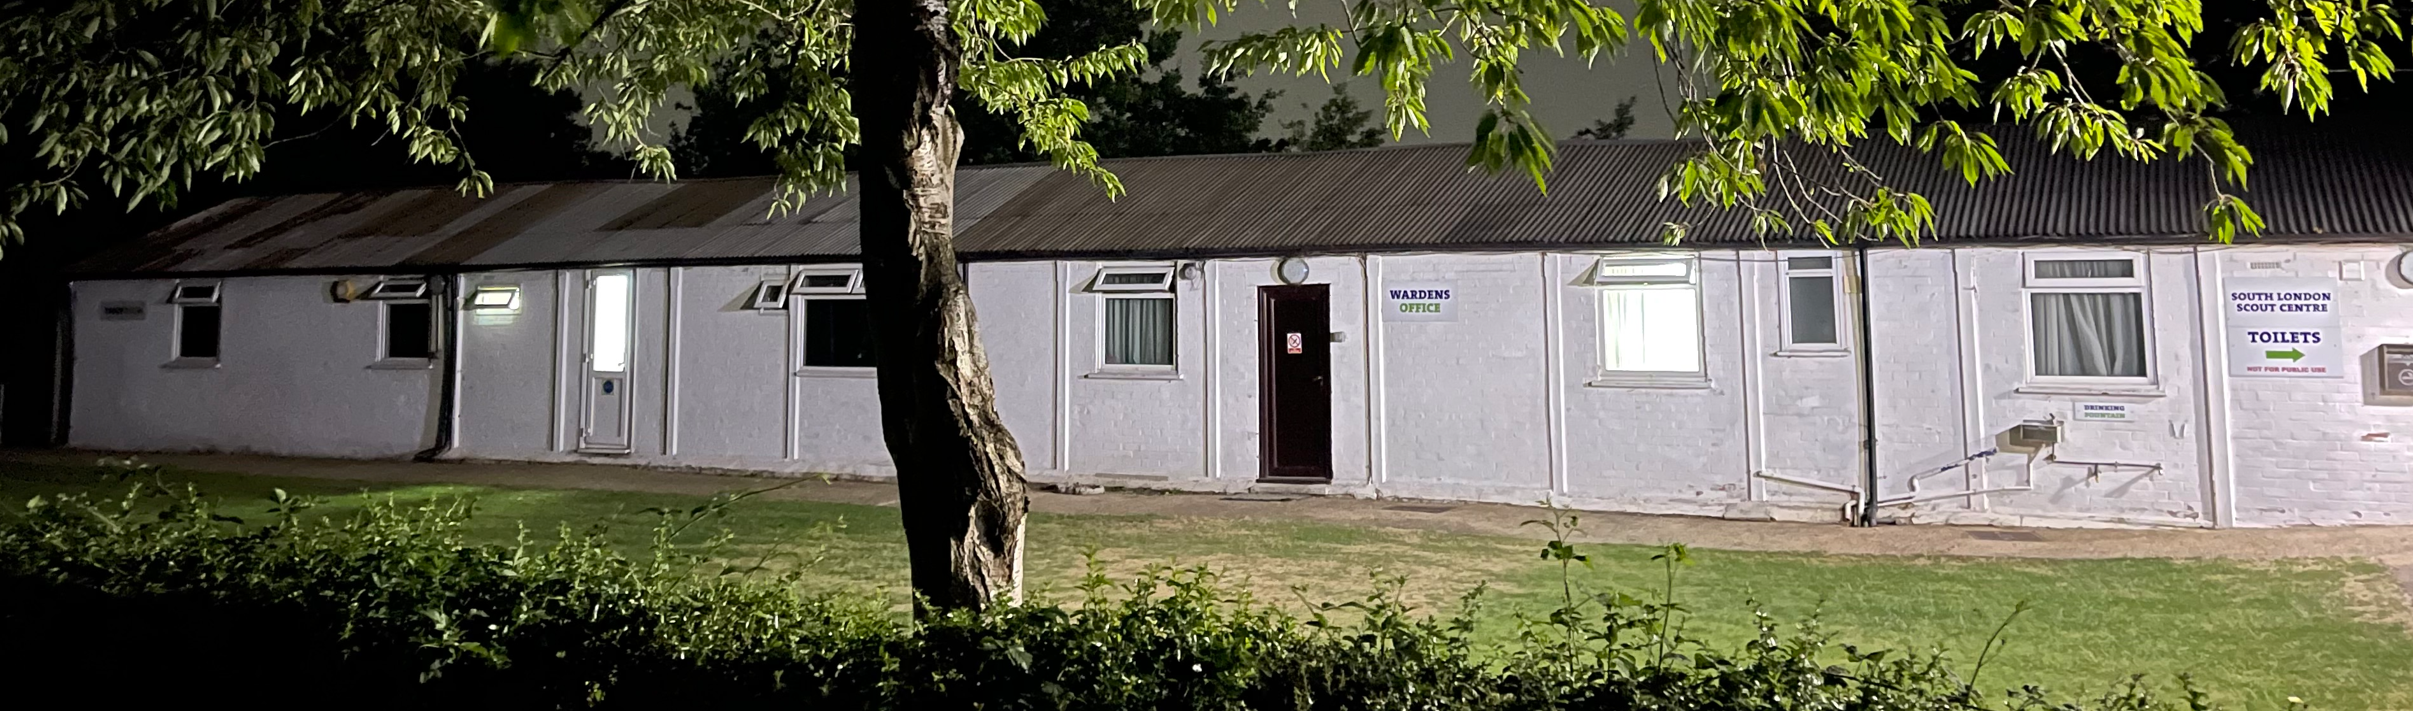 The Troop Room building at night 